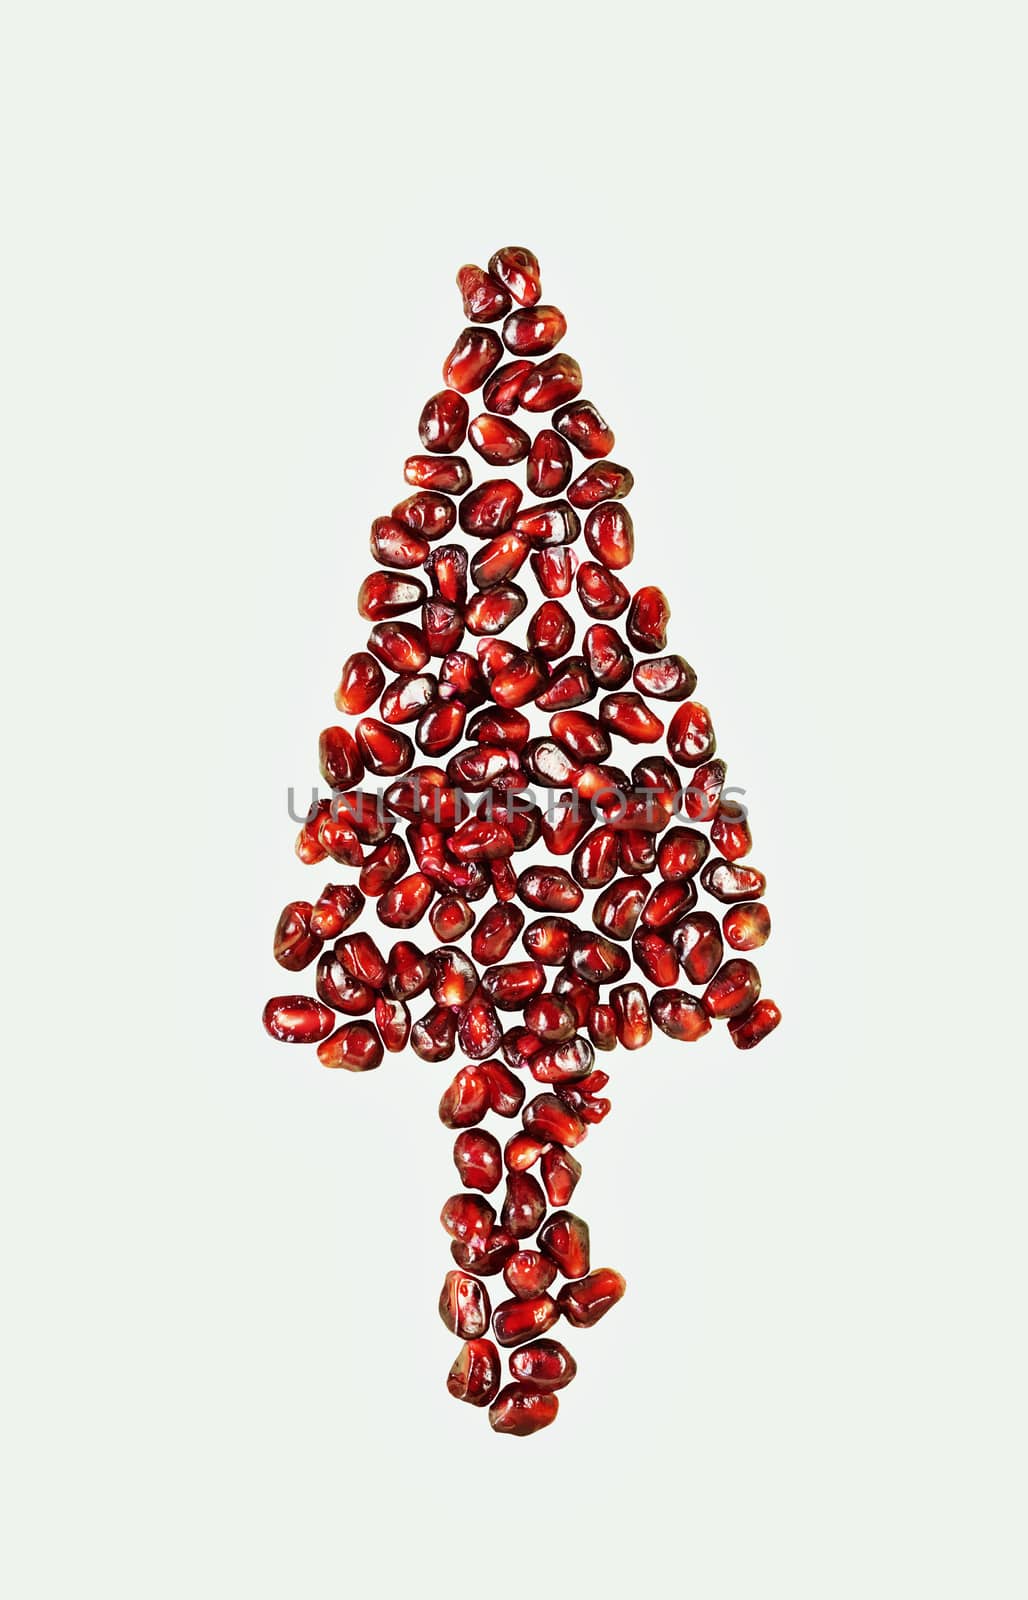 Beautiful christmas tree made with red pomegranate seeds on white background